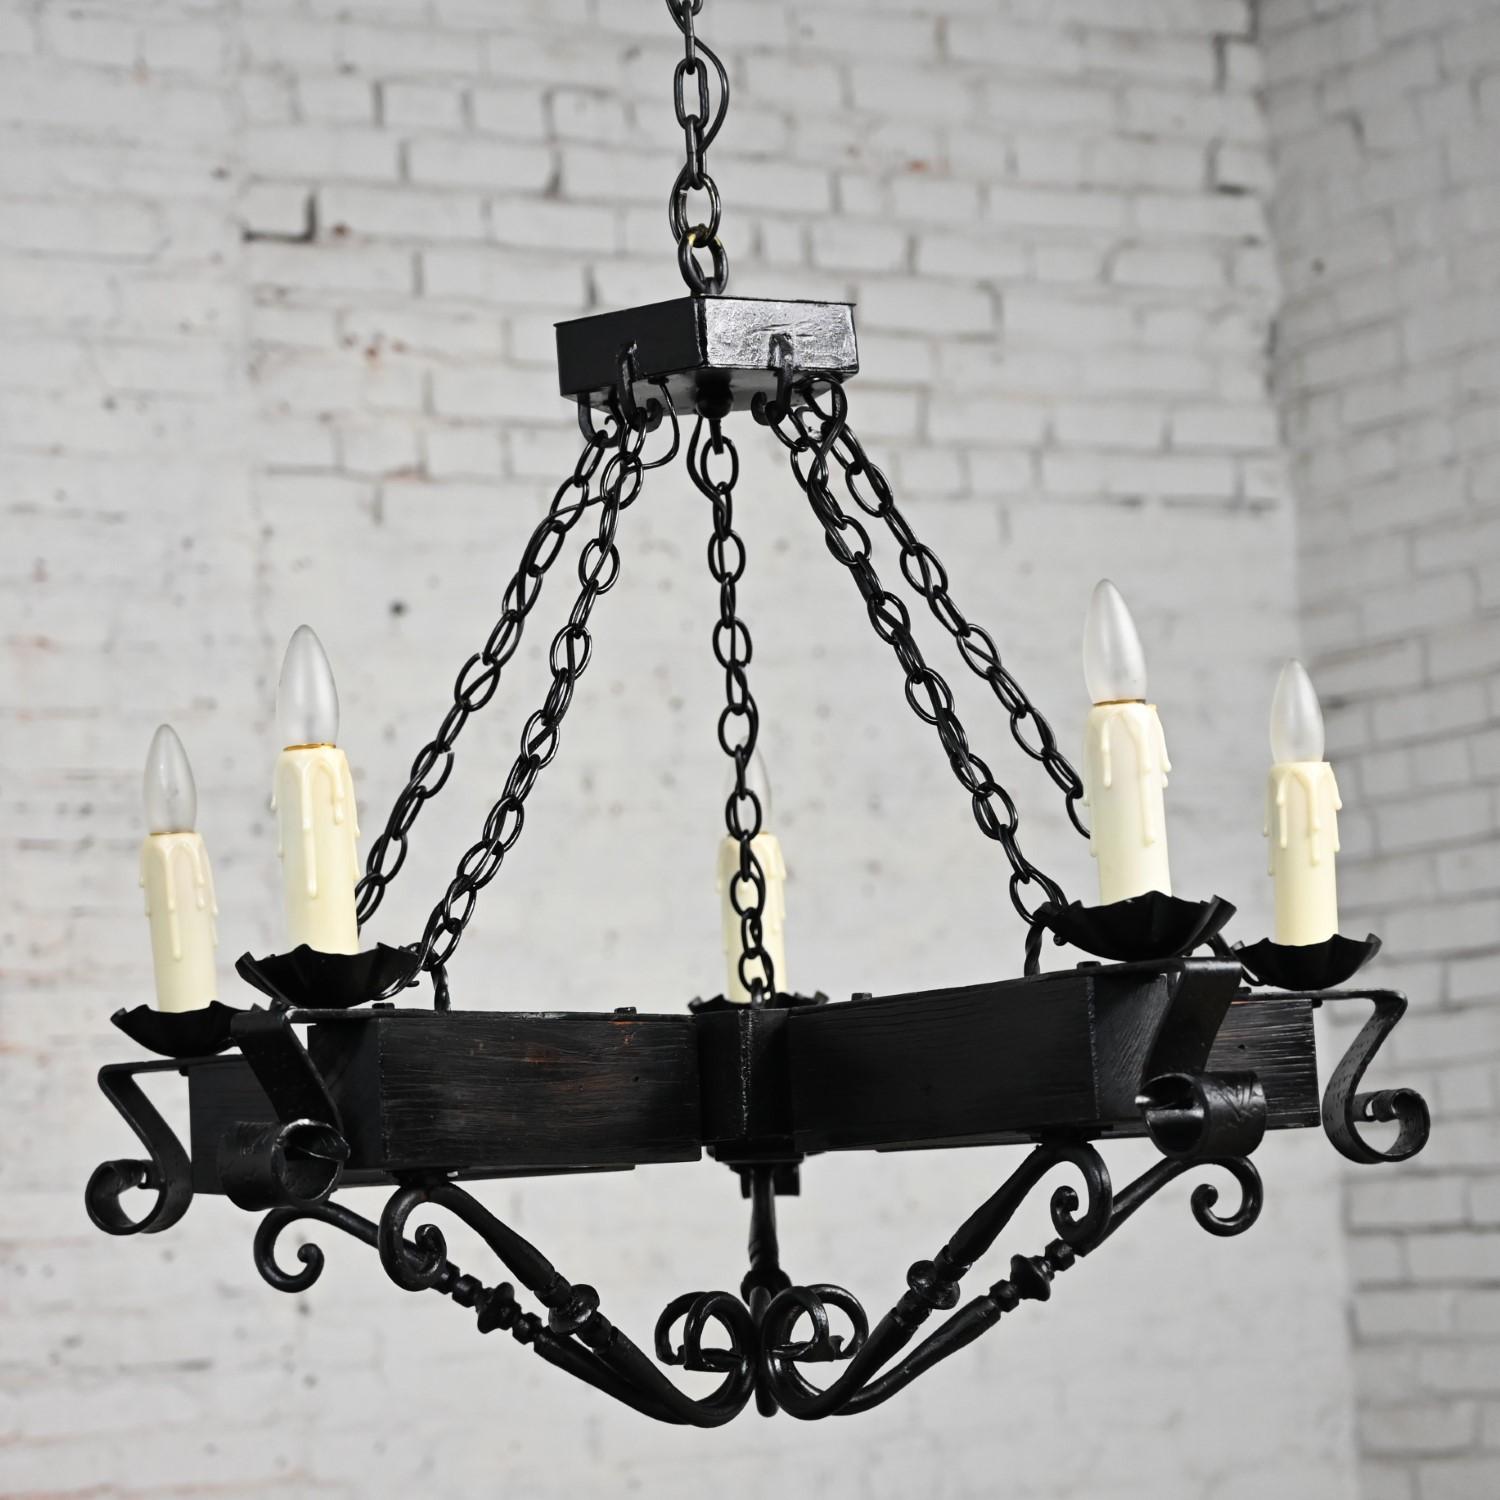 Mexican John C Virden Medieval Gothic or Spanish Revival Style Hanging Light Fixture  For Sale